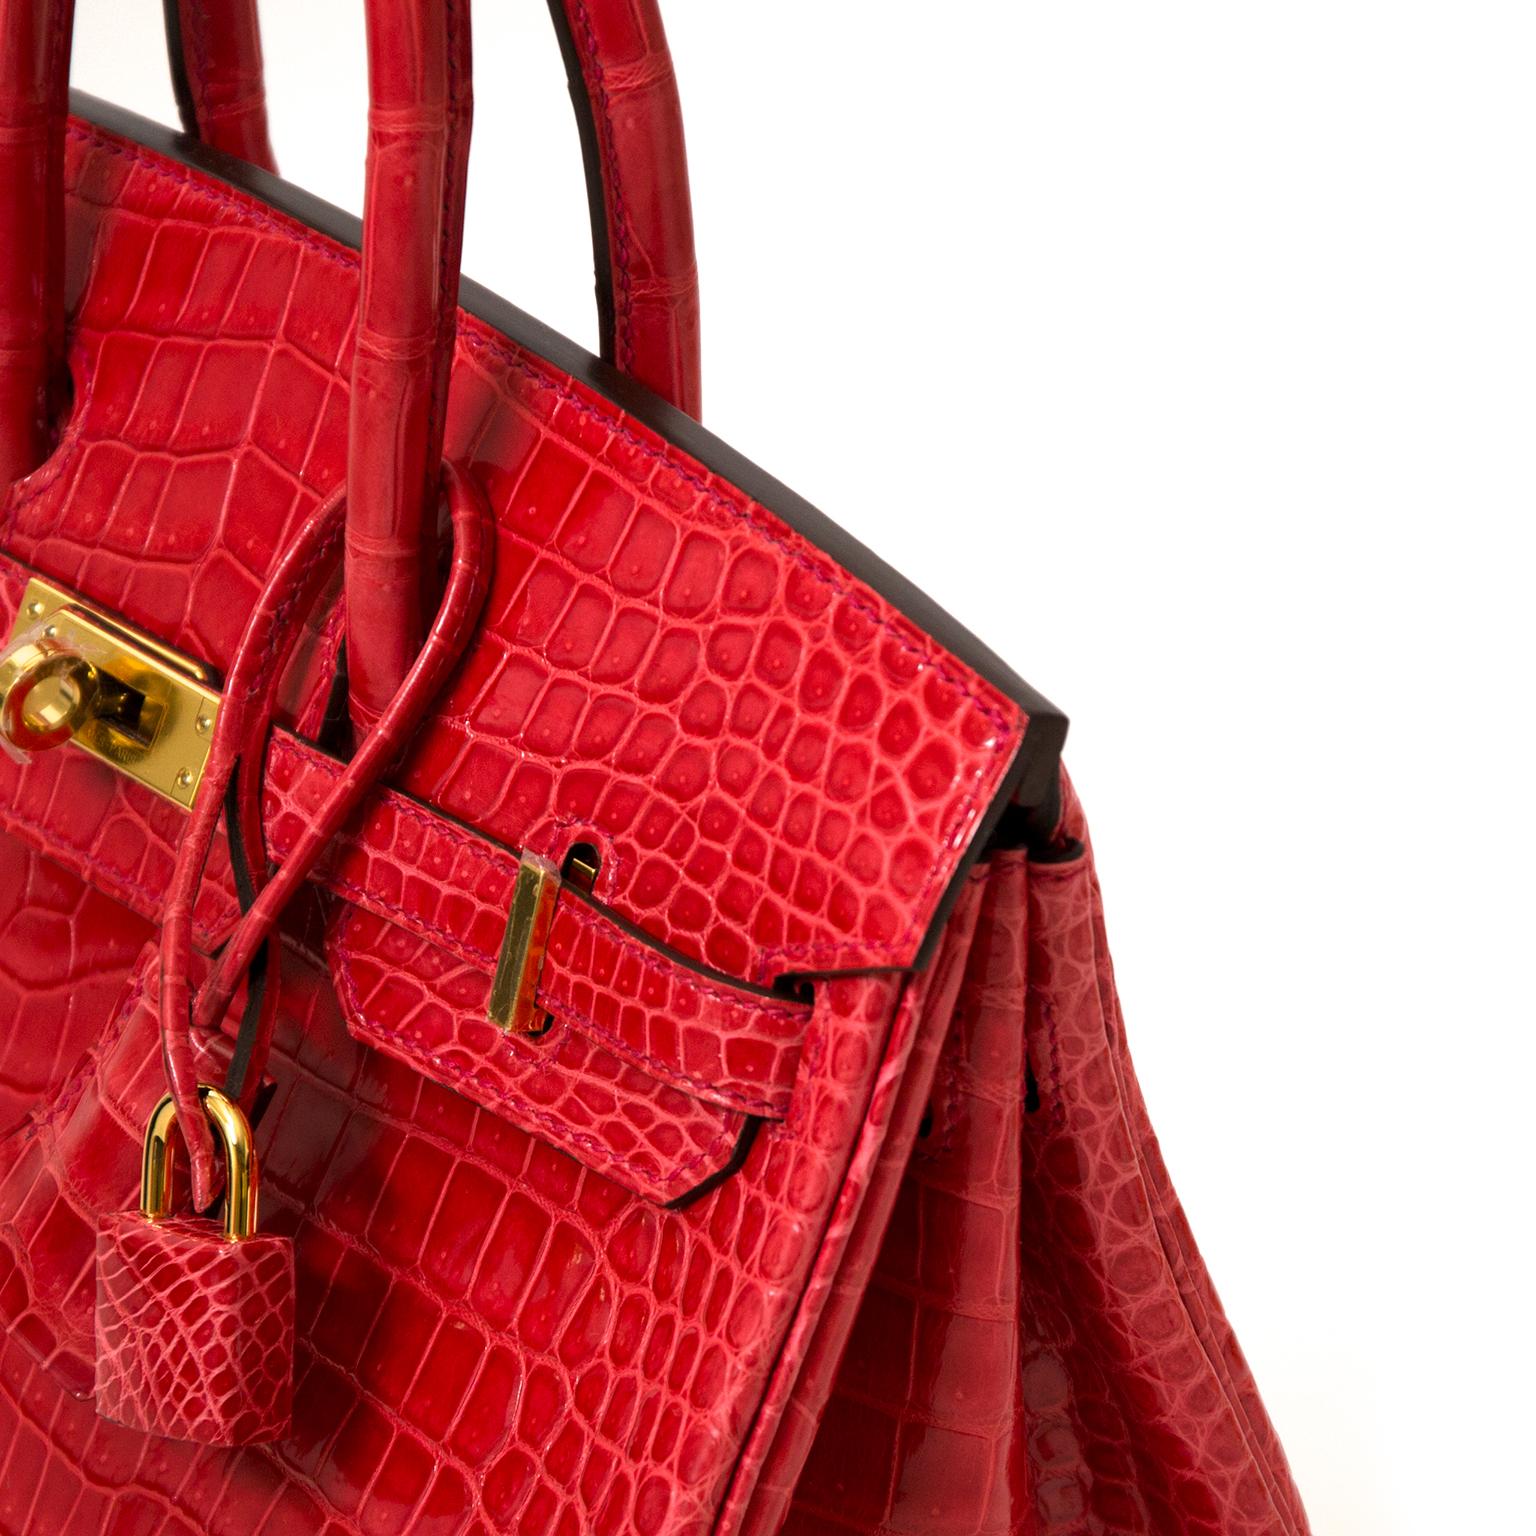 Brand new

Very Rare Hermès Birkin 25 Crocodile Porosus Bougainvillier ghw

This very rare Hermès Crocodile Birkin comes in a beautifull rich deep red color named 'Bougainvillier'.

This limited bag is made from shiny porosus crocodile skin, which